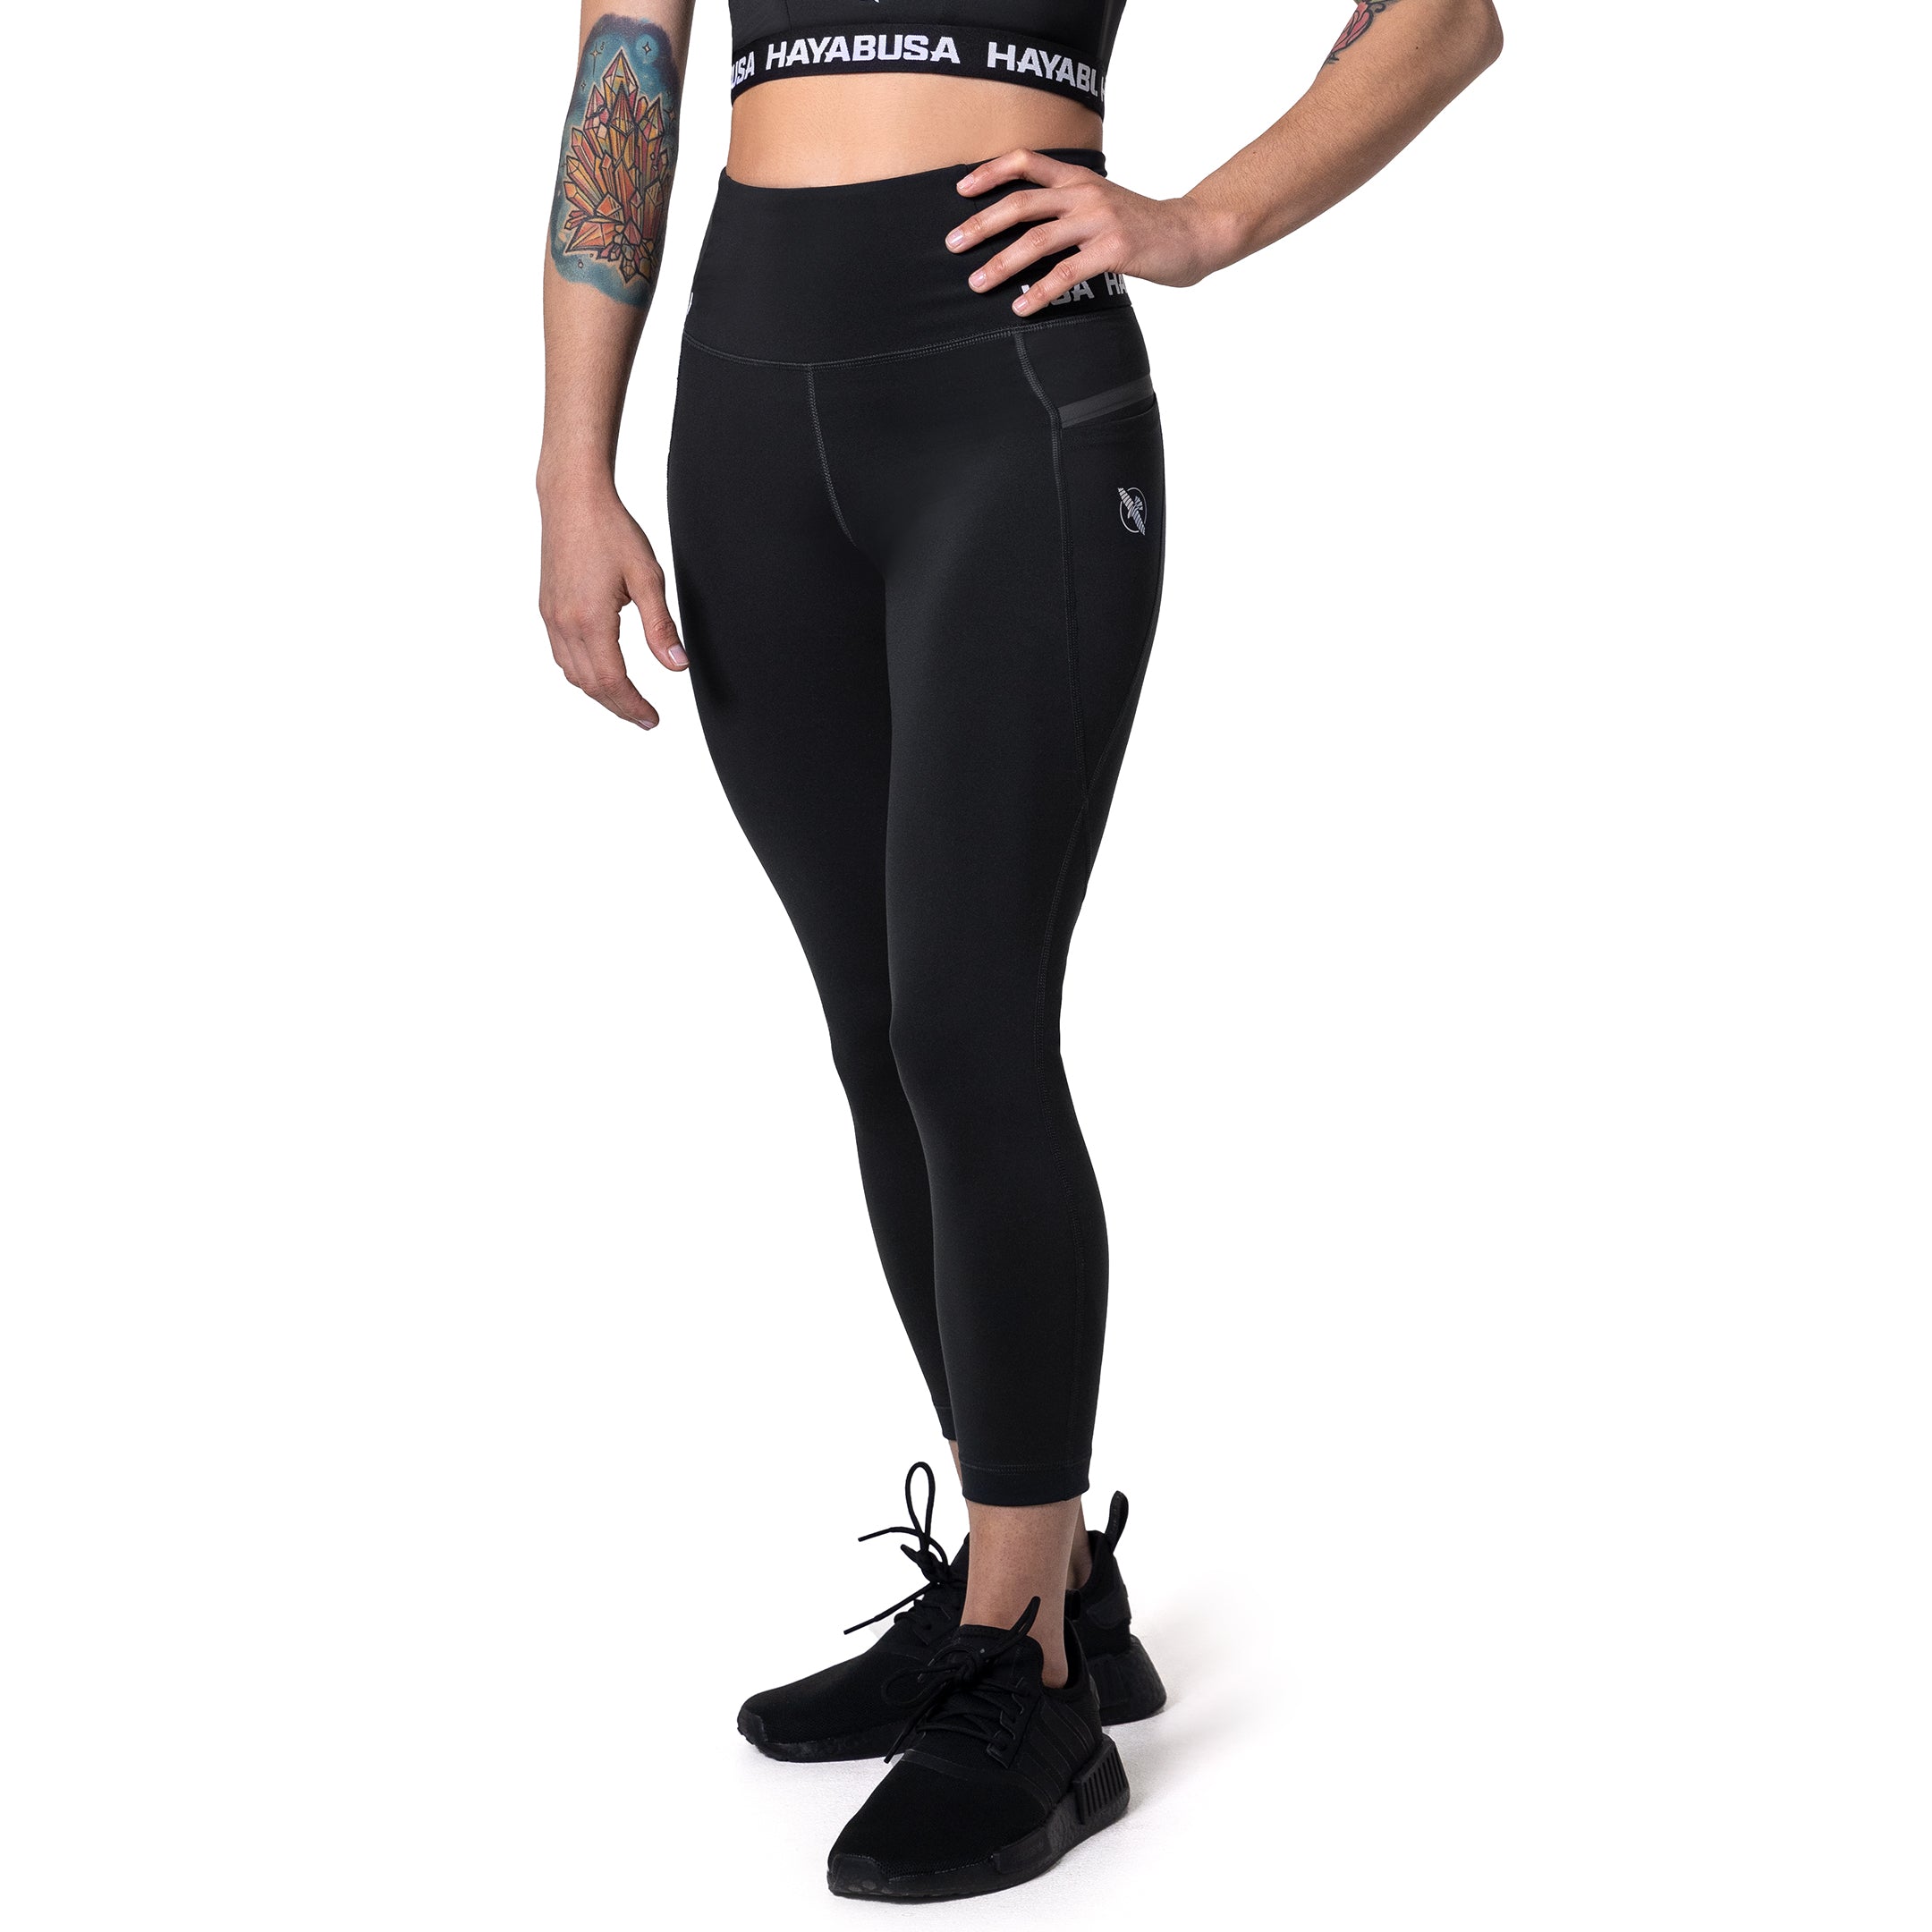 Givova Women's sport suit top + 3/4 leggings: for sale at 19.99